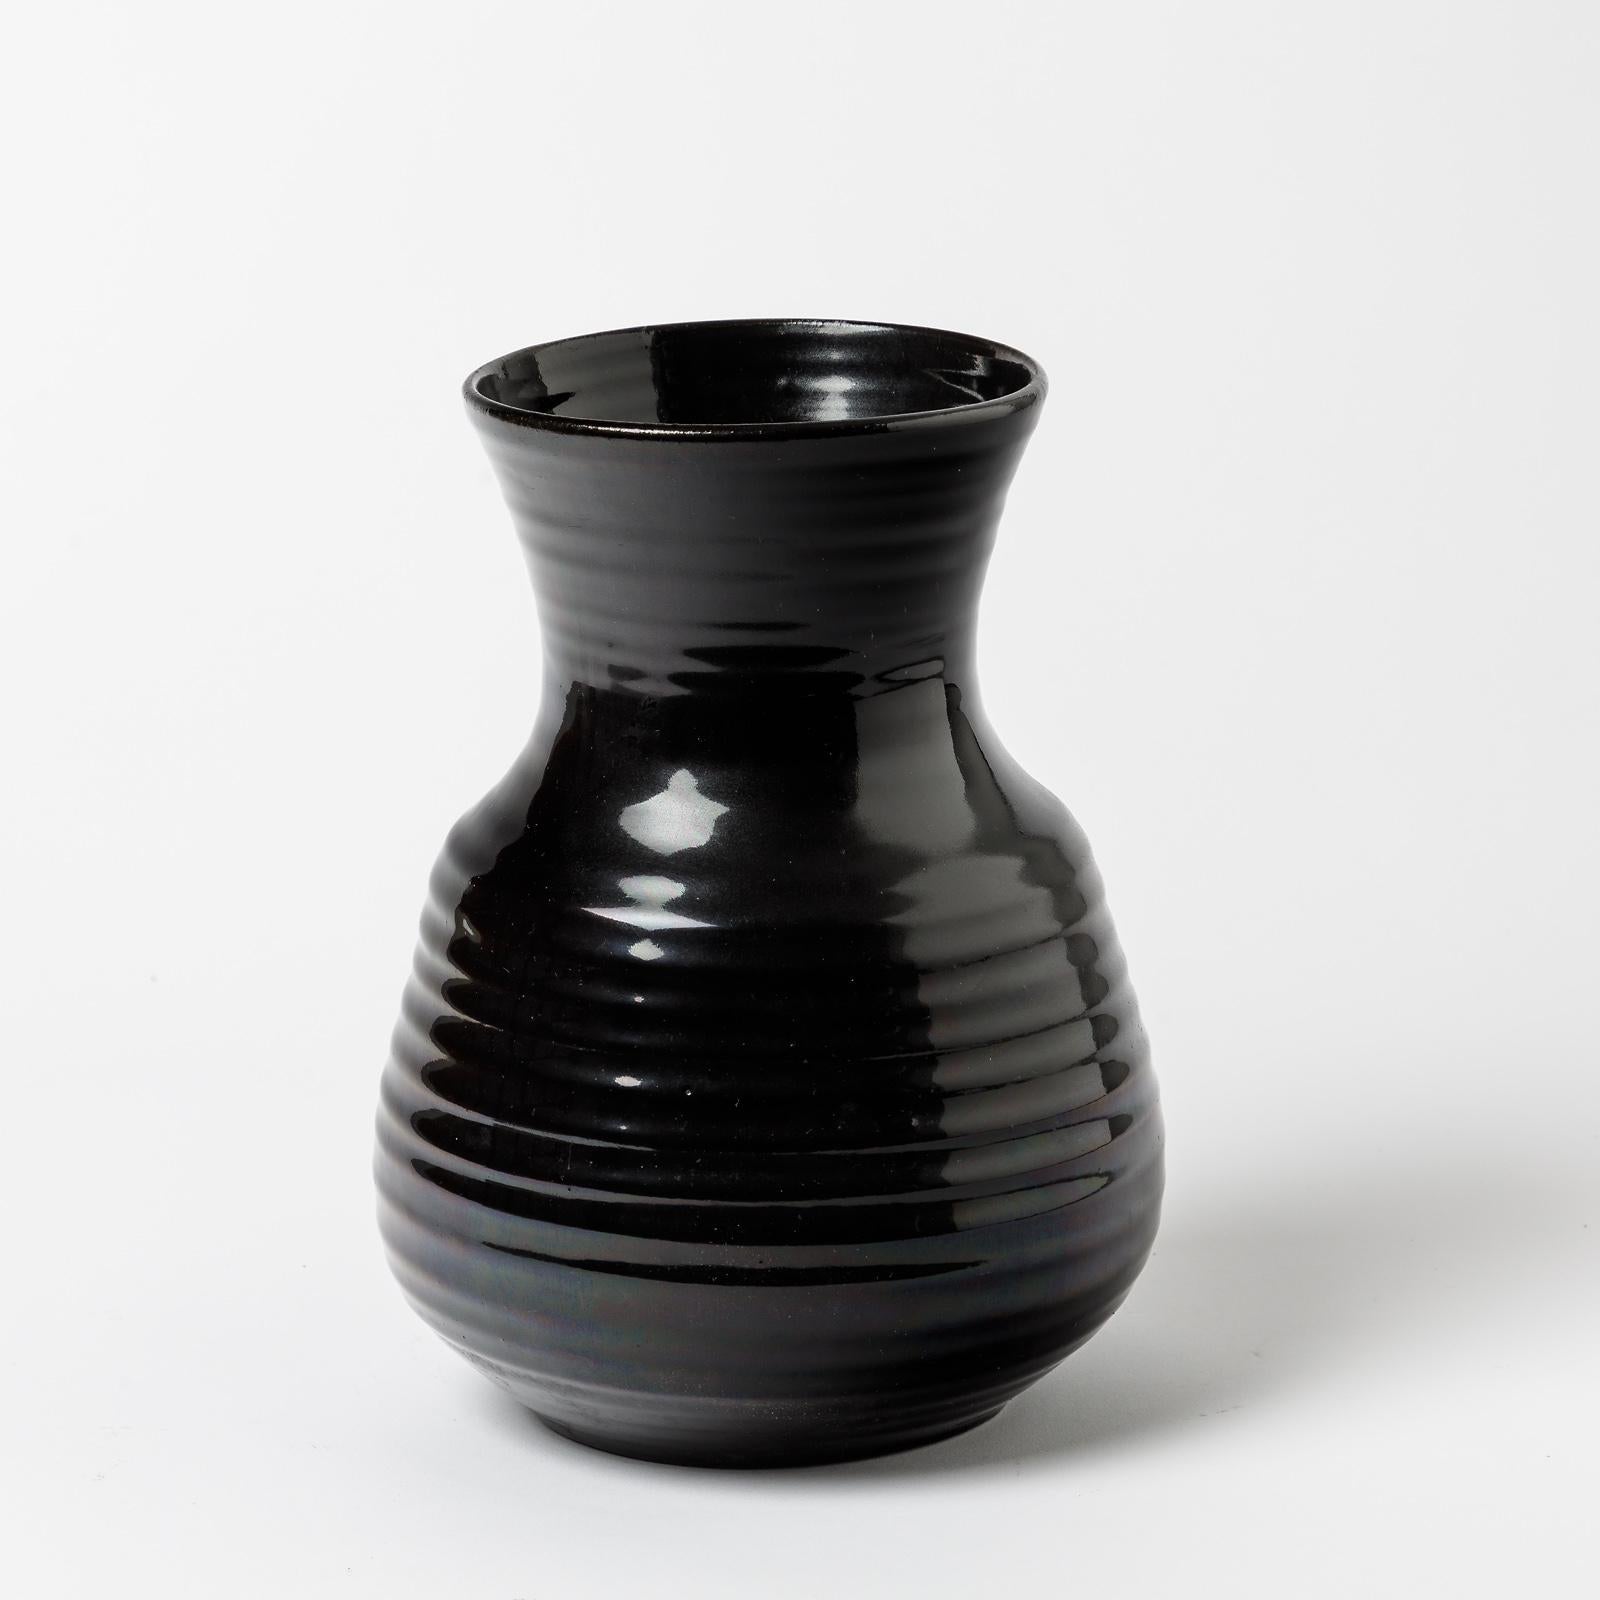 A ceramic vase with black glaze decoration by Accolay.
Perfect original conditions.
Signed 